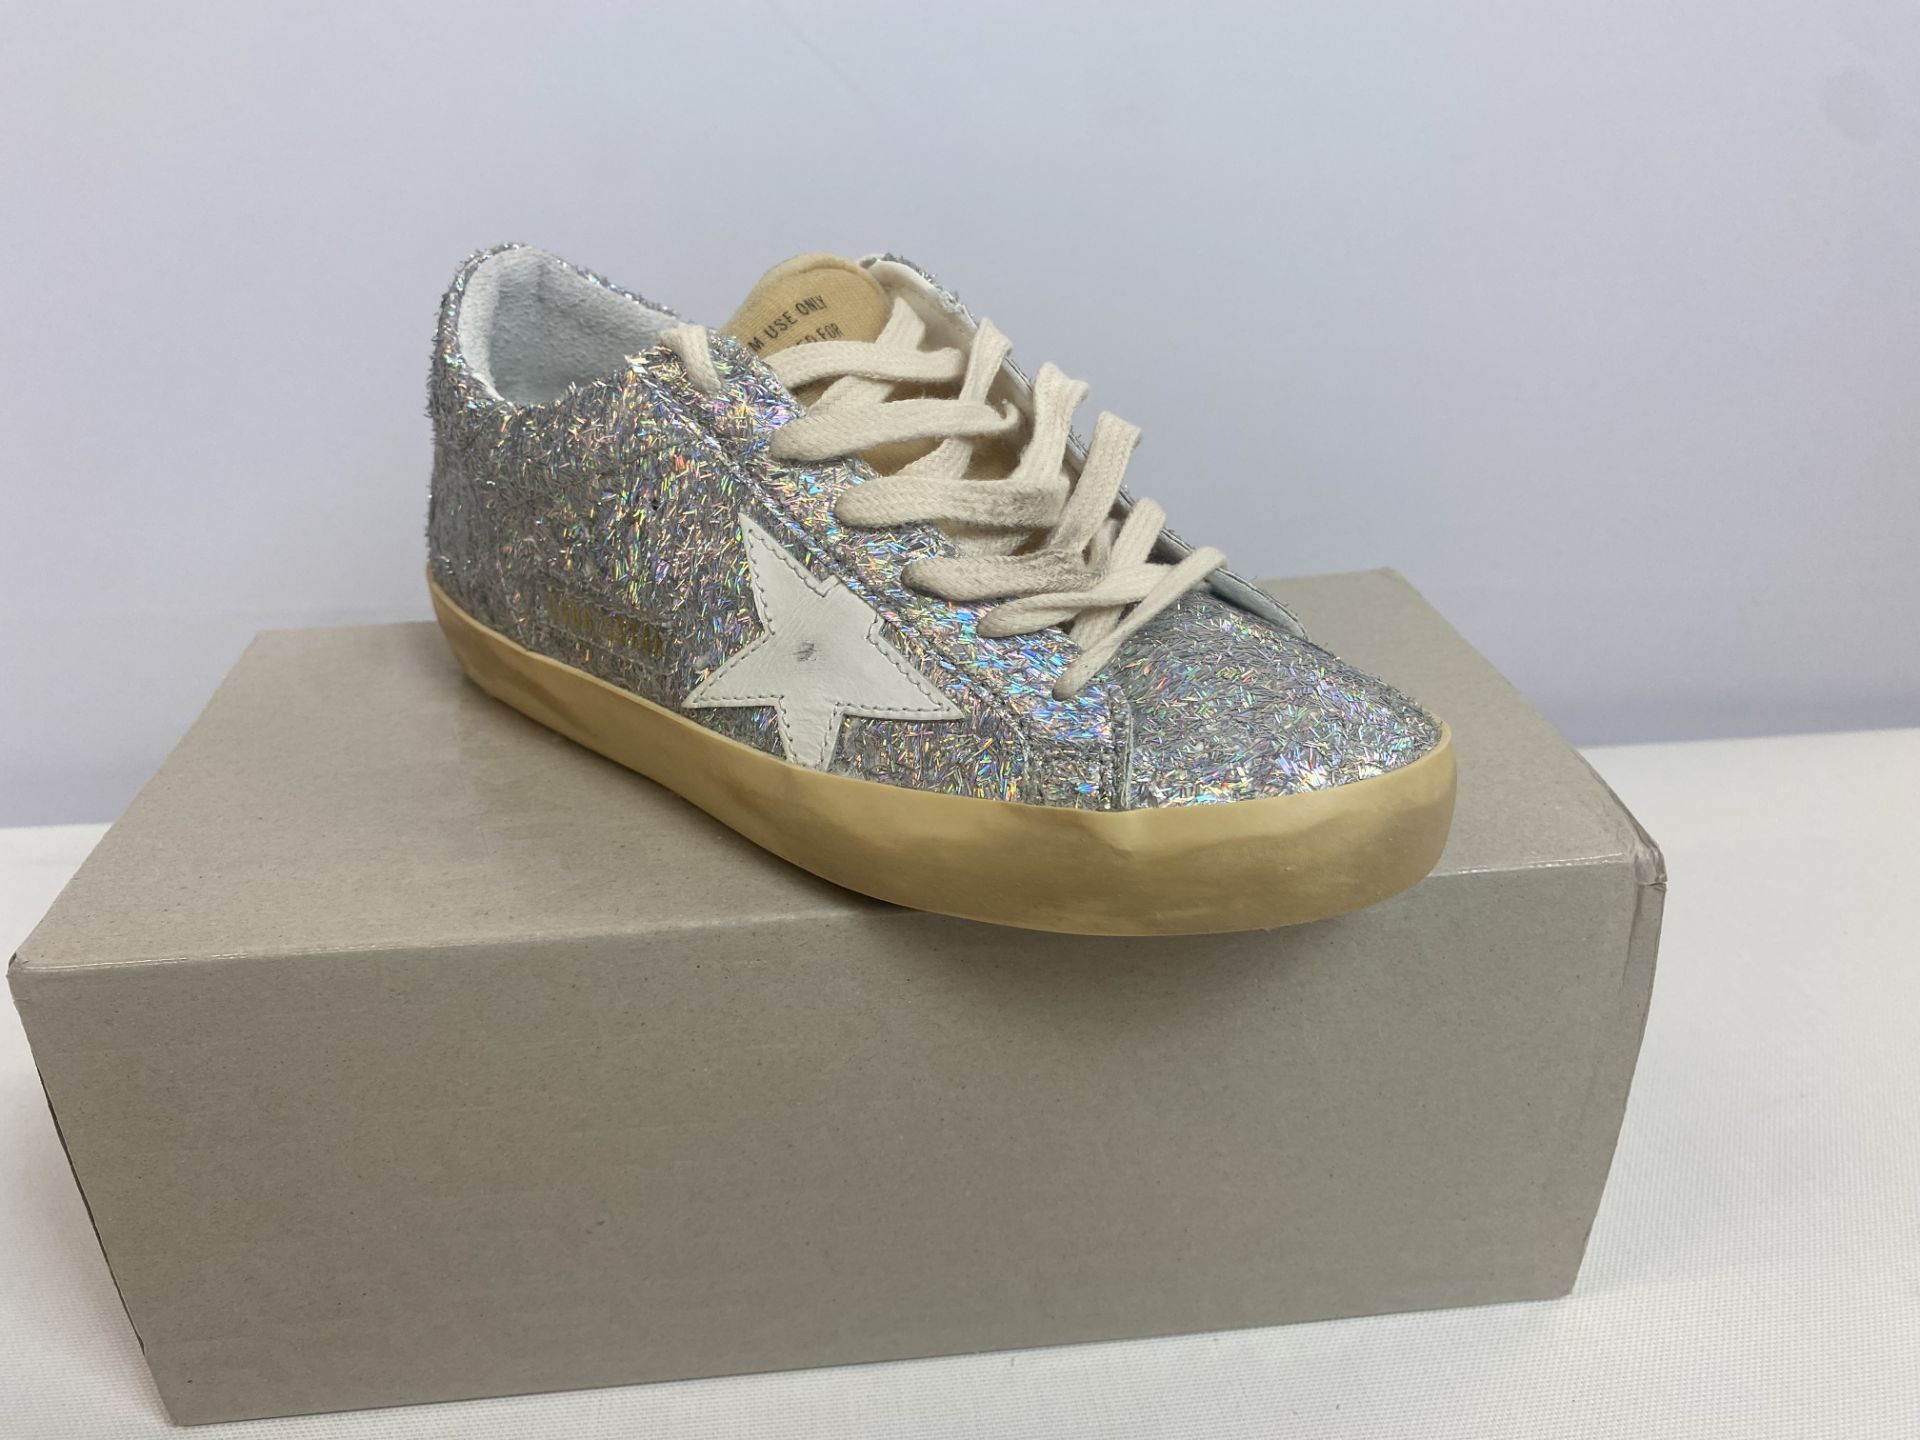 Golden Goose SNKR SUPERSTAR Super Star Classic with list, Size: 36, Color: Silver, Retail Price: $